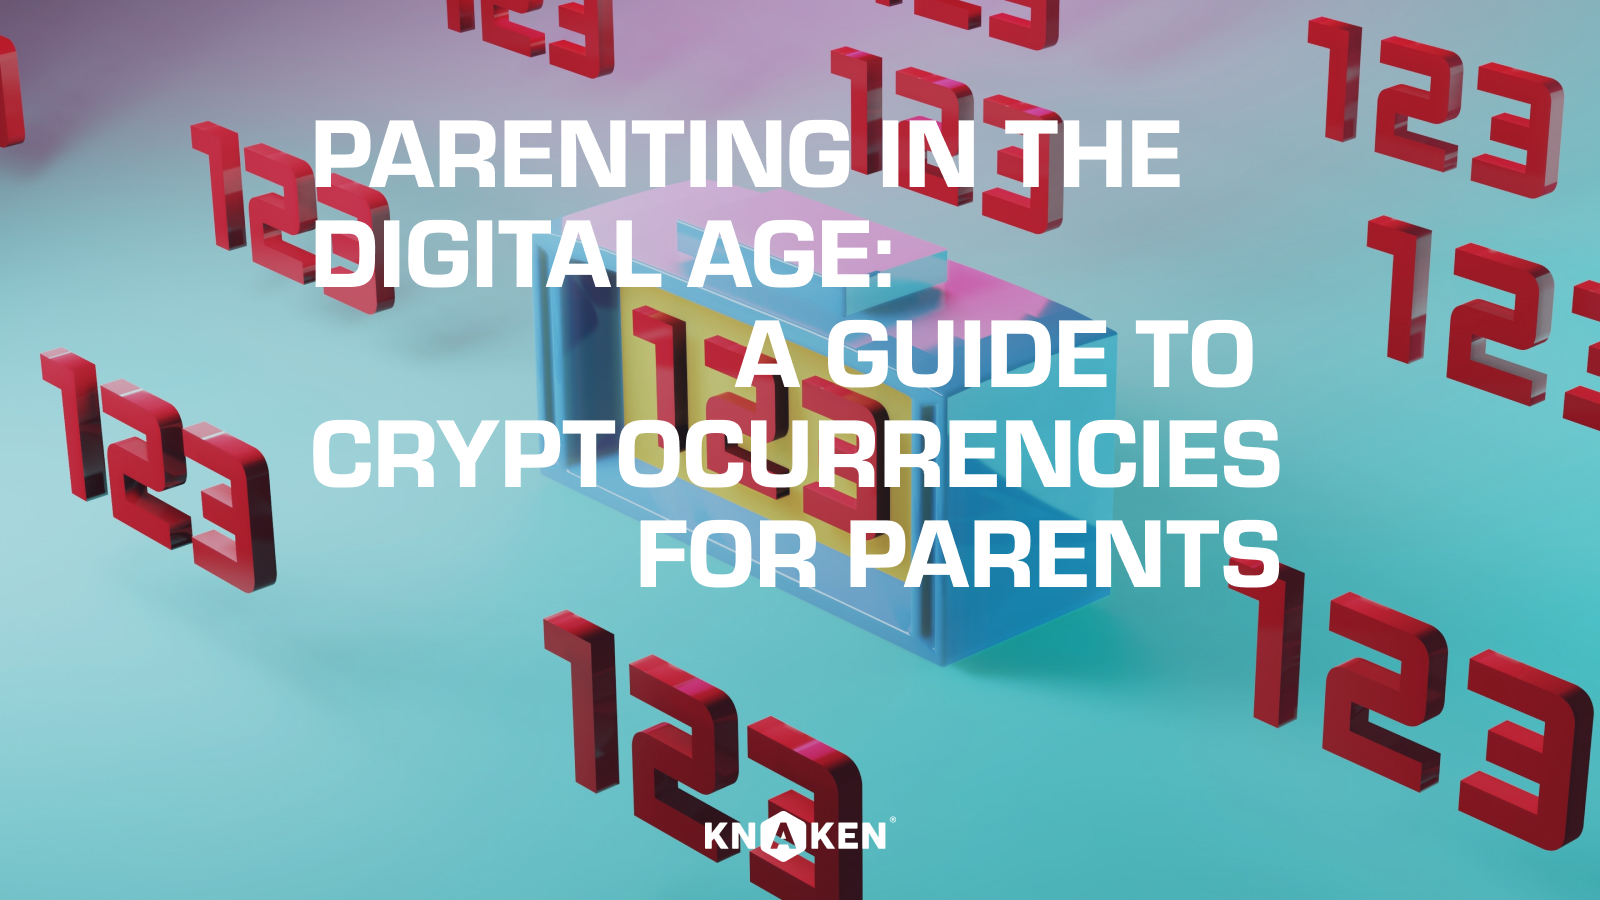 Parenting in the digital age: A guide to cryptocurrencies for parents